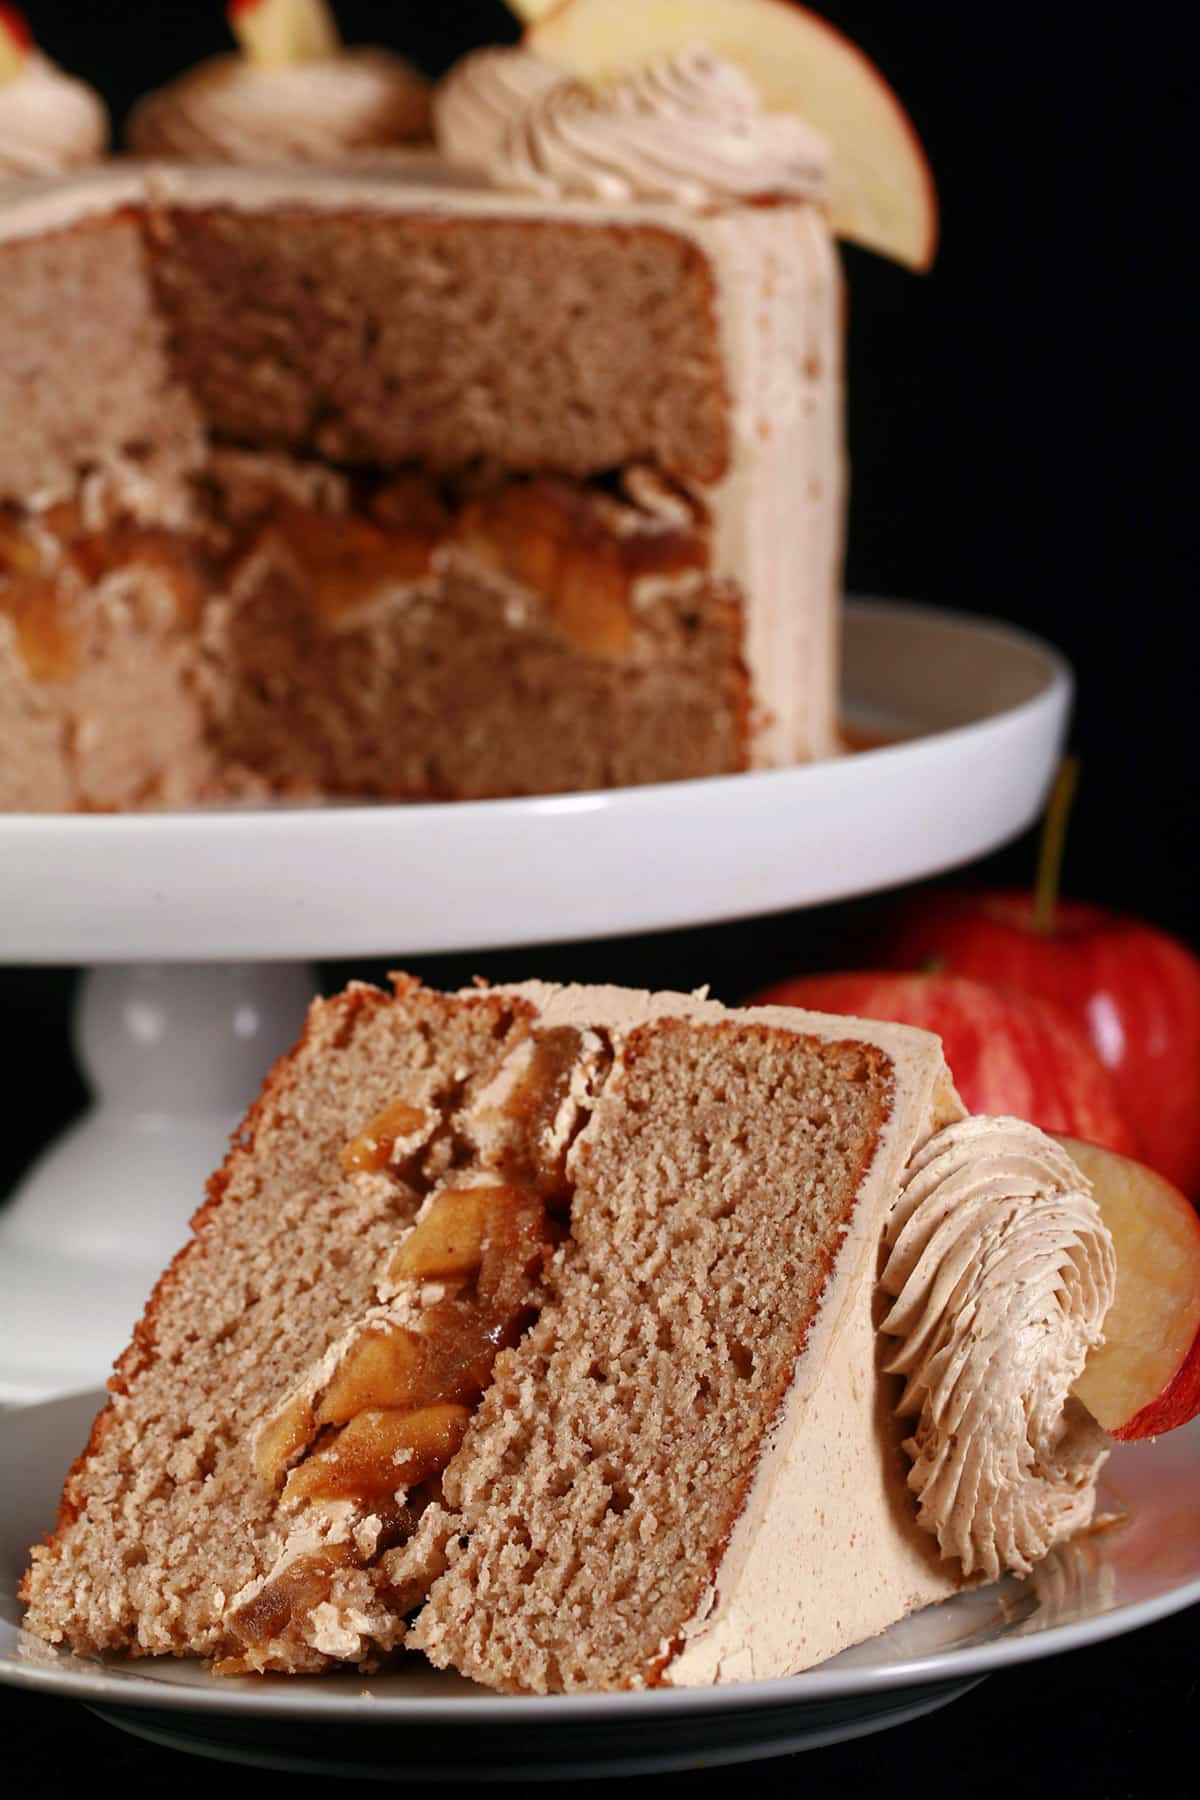 A slice of gluten-free apple cake on a plate in front of the whole gluten free apple cake.